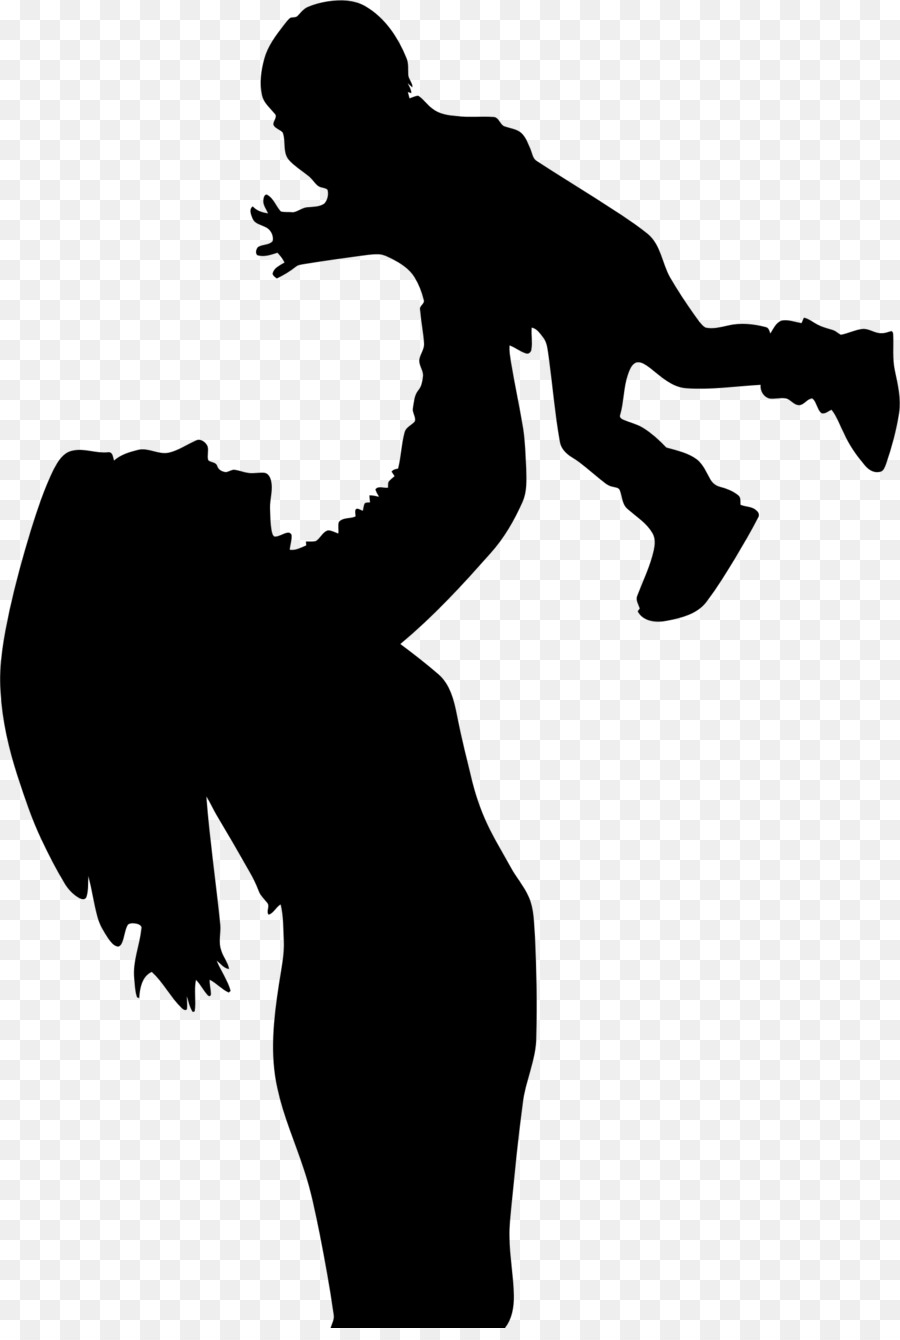 Mother Son Child Clip art - mother png download - 1543*2276 - Free Transparent Mother png Download.